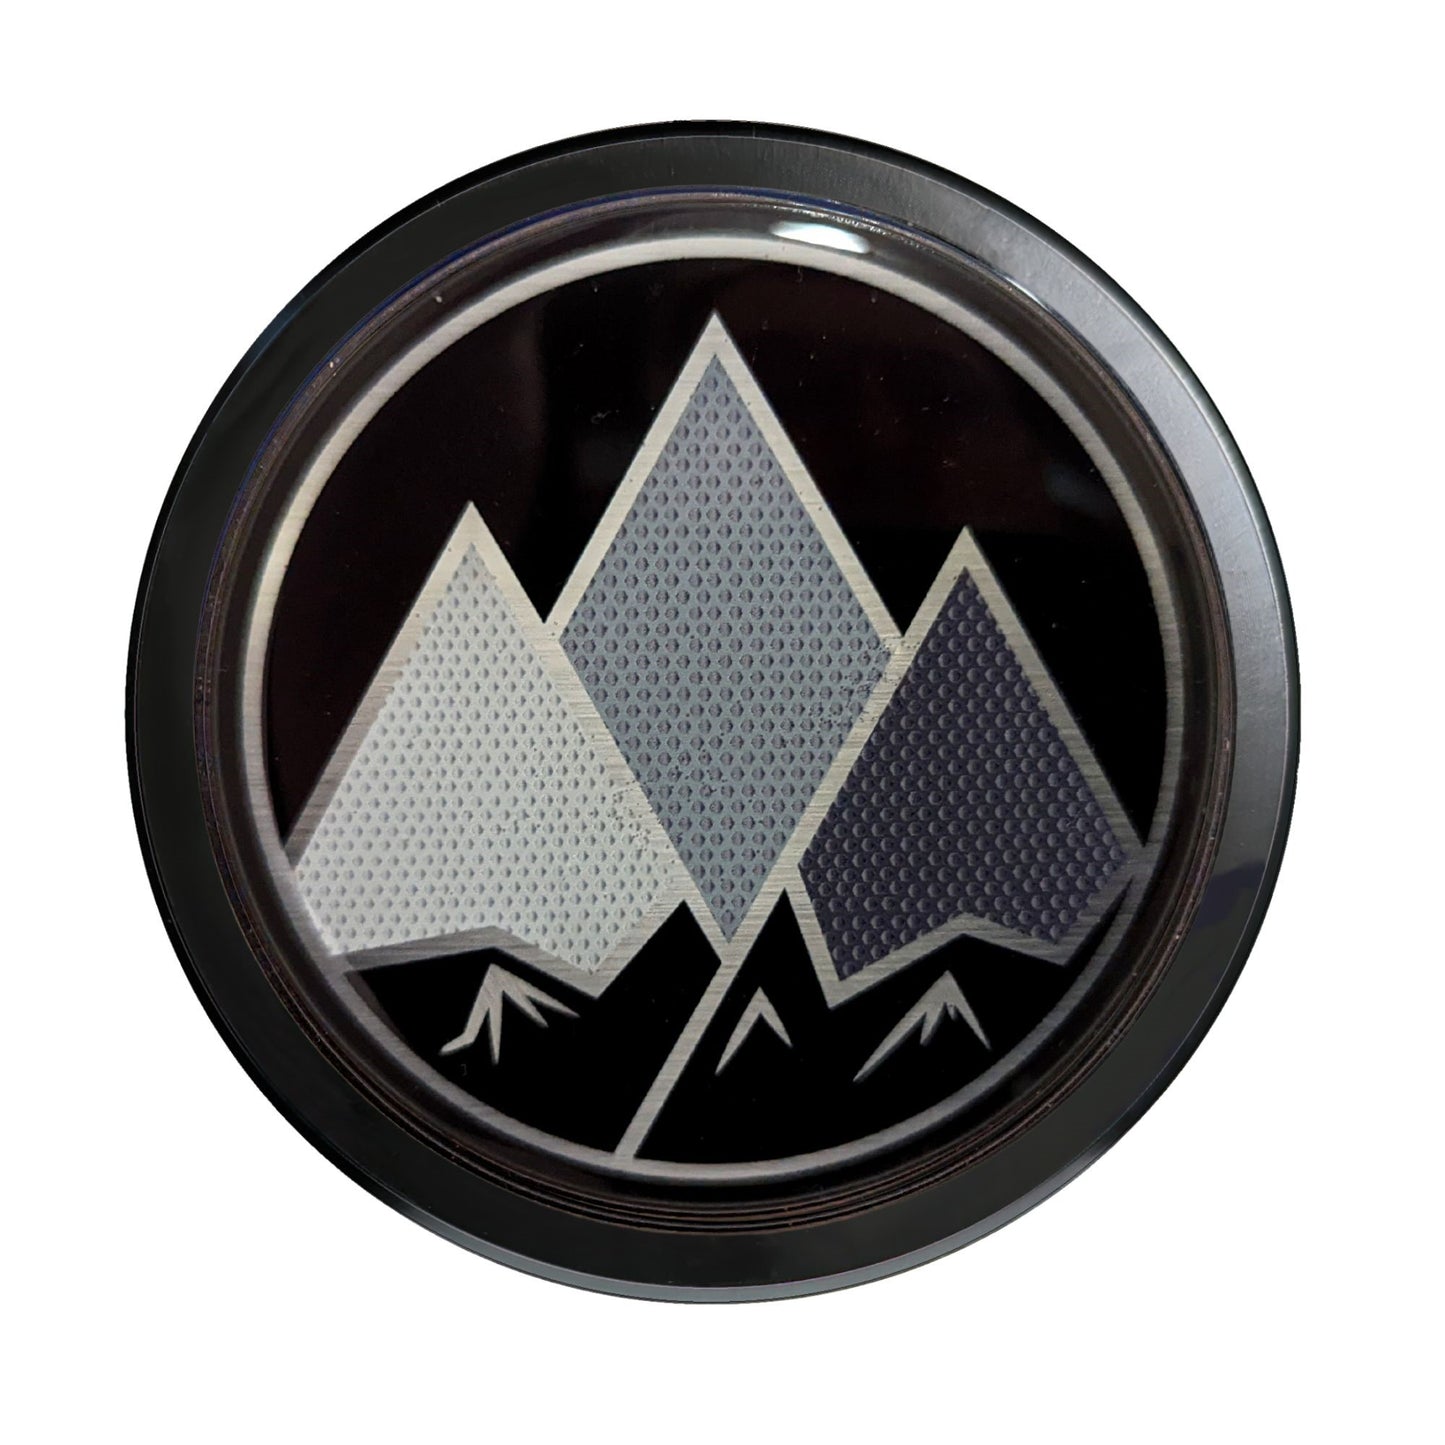 Visit www.thegrillebadgestore.com Huge Collection of Badges! Mountain, Stripe, Retro, Pop Culture & More Standard Grille Badge Mountain Style (Not Acrylic) Aluminum With Resin Center, Full 1 Year Warranty - Blackout emblems and overlays are popular, but add a splash of color to your grille badge on Tacoma, FJ Cruiser, 4Runner, Tundra, Lexus GX and LX, Landcruiser and Domestics like Ram, Jeep, Ford and Chevy). We have also found Subaru, Nissan Frontier and Titan owners love our grille badges! TEQ